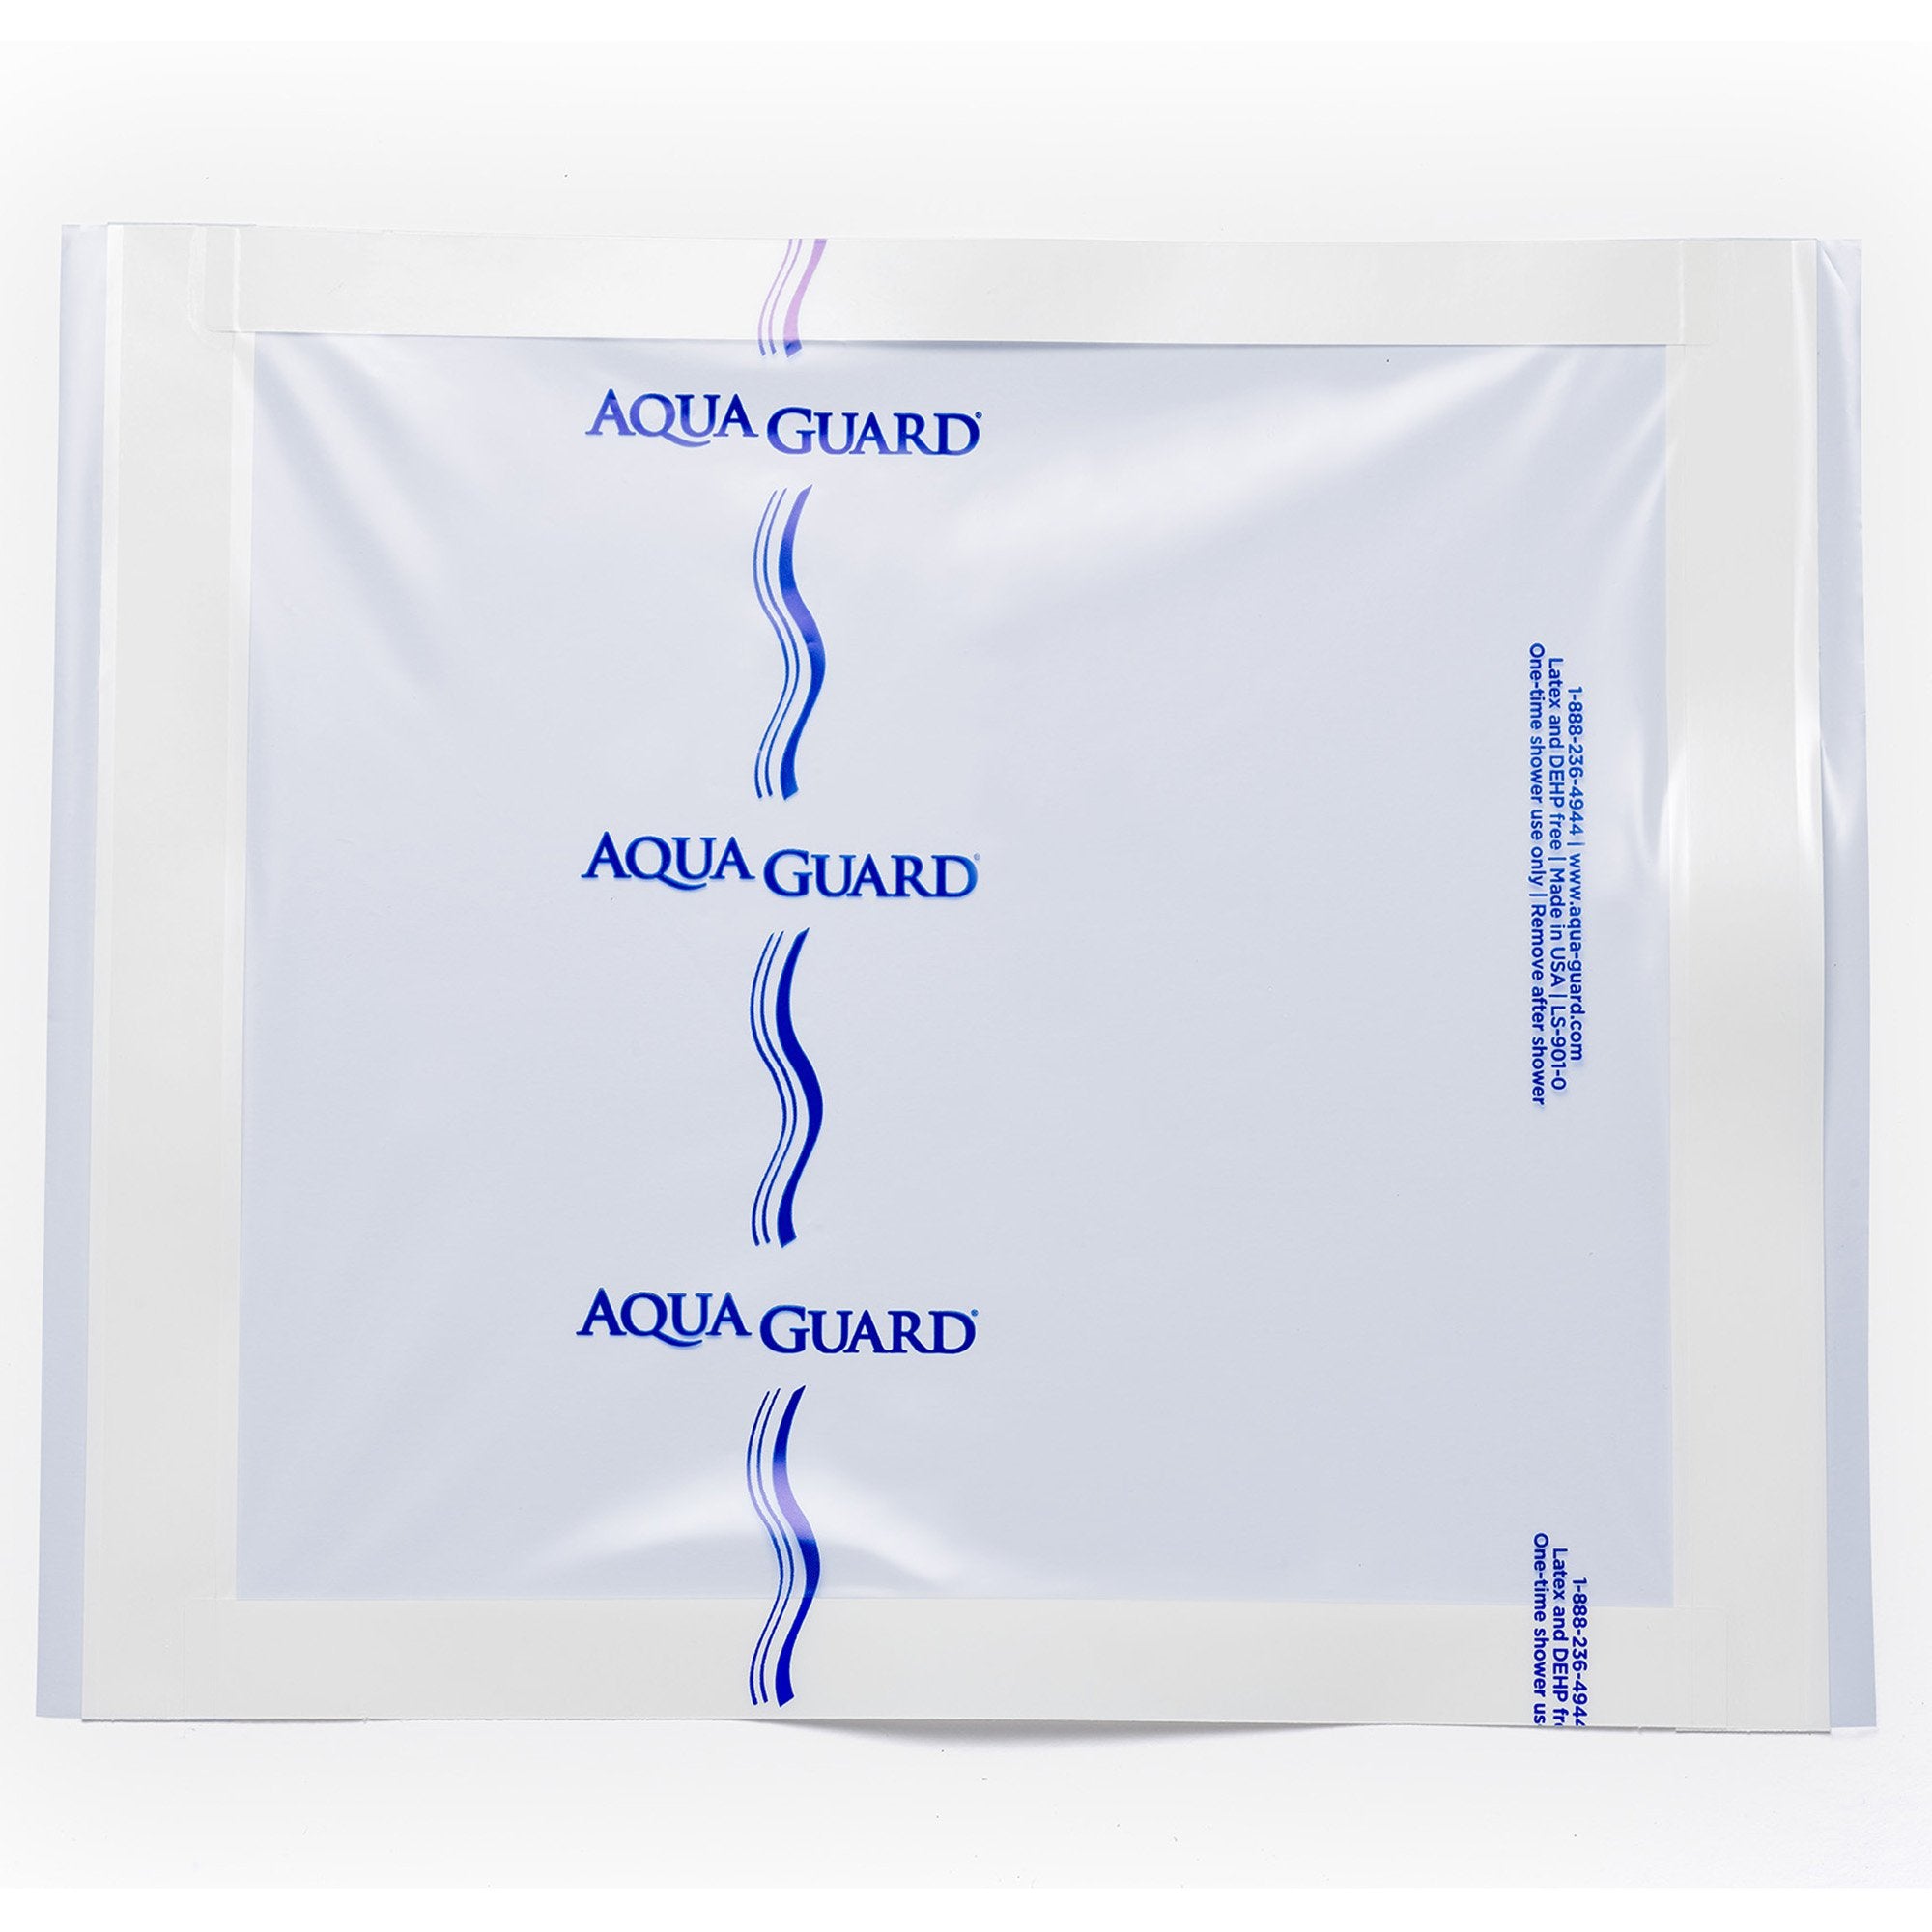 Wound Protector AquaGuard Shower Sheet Cover Adhesive